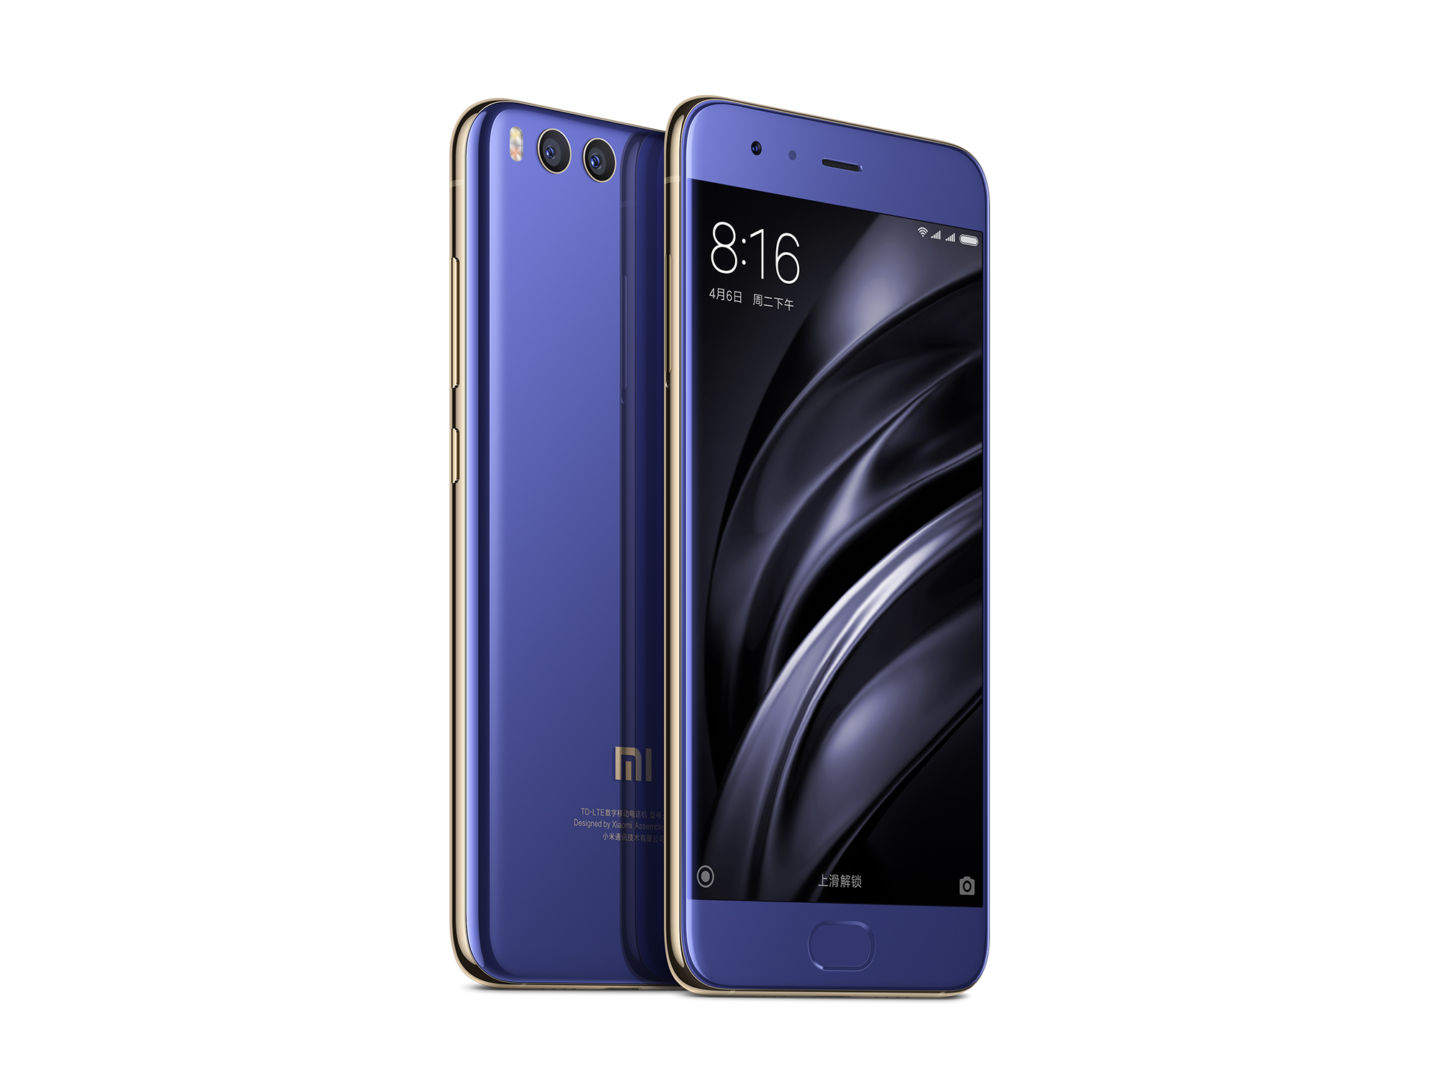 The Xiaomi Mi 6 out-specs the Galaxy S8 for half the price